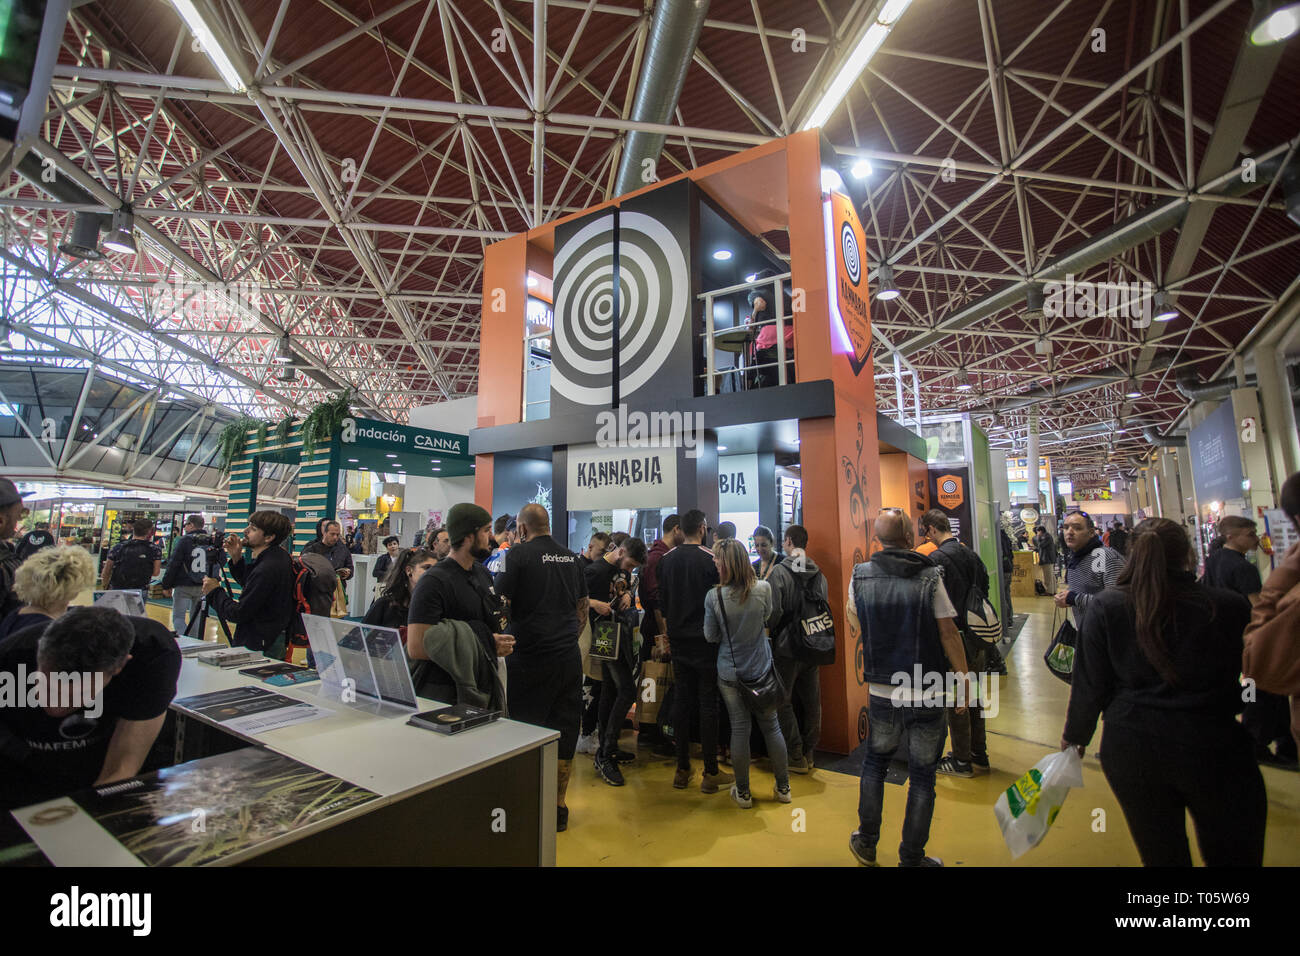 Barcelona, Spain. 16th March 2019. Different kinds of people seen attending the festival. Spannabis 2019, a cannabis festival and biggest in Europe. Kannabia is one of the larger seed banks during the festival and it’s visited by thousands of people every year. Credit: SOPA Images Limited/Alamy Live News Stock Photo